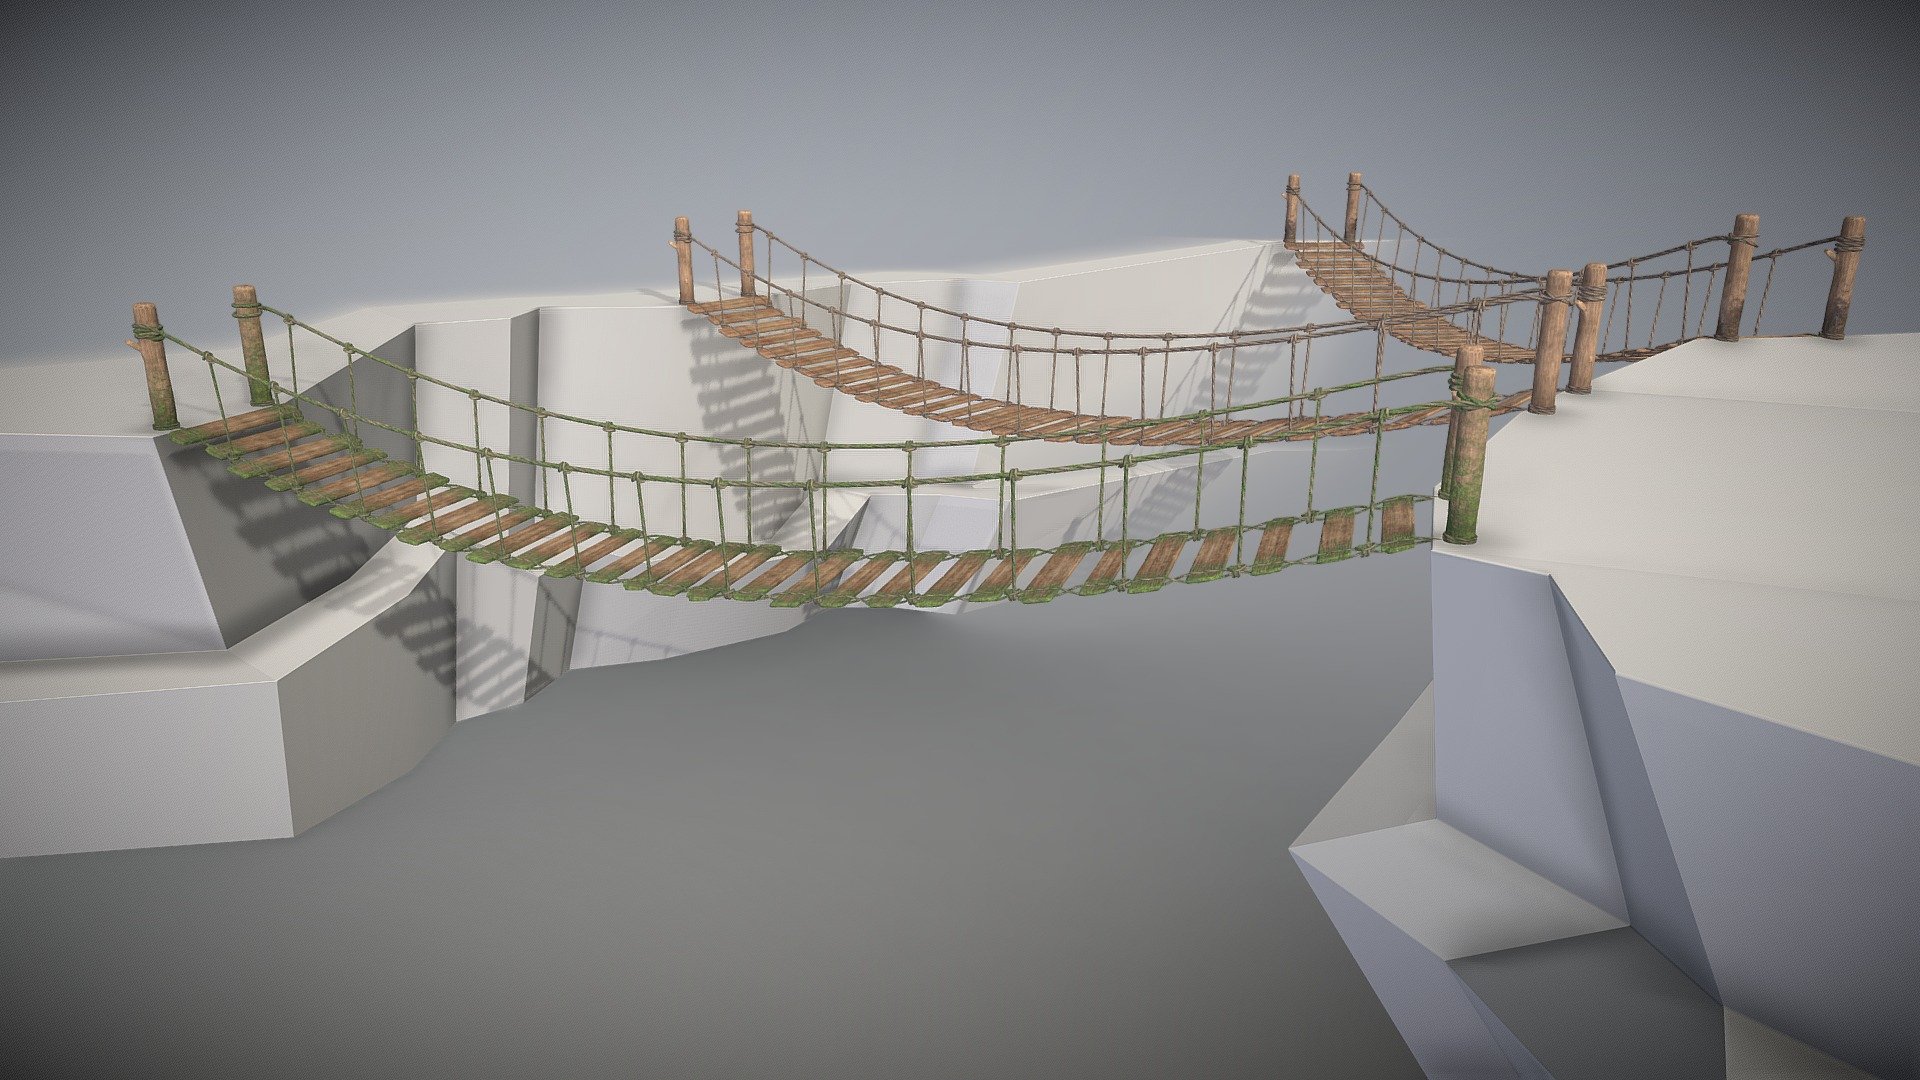 A Longer version of the rope bridge that I previously made.  It still is a game ready asset sized at 1 meter wide x 1 meter tall x 10 meters long. It uses a single 2K, PBR ready material (10.24 texel density) with a base color, roughness, height, and normal map. The model uses overlapping UVs. A metal map is not necessary as there are no metal parts in the model (just set the metal to be 0 in your material). It was created using fully licensced software (Maya, Zbrush, and Substance Painter) and can be used in any of your projects.  It currently uses about 47k tris.  



Additional files contains:

4K Textures
3 additional LODs (LOD1 - LOD3)
Kit used to build the asset.
High Poly models of building kit



Thanks for taking a look at my work! Feel free to give me a like or leave a comment if you have any questions. Be sure to follow as I will be making more assets in the future with a freebie every now - Rope Bridge | 10 Meter - 3D model by Cobernicus 3d model